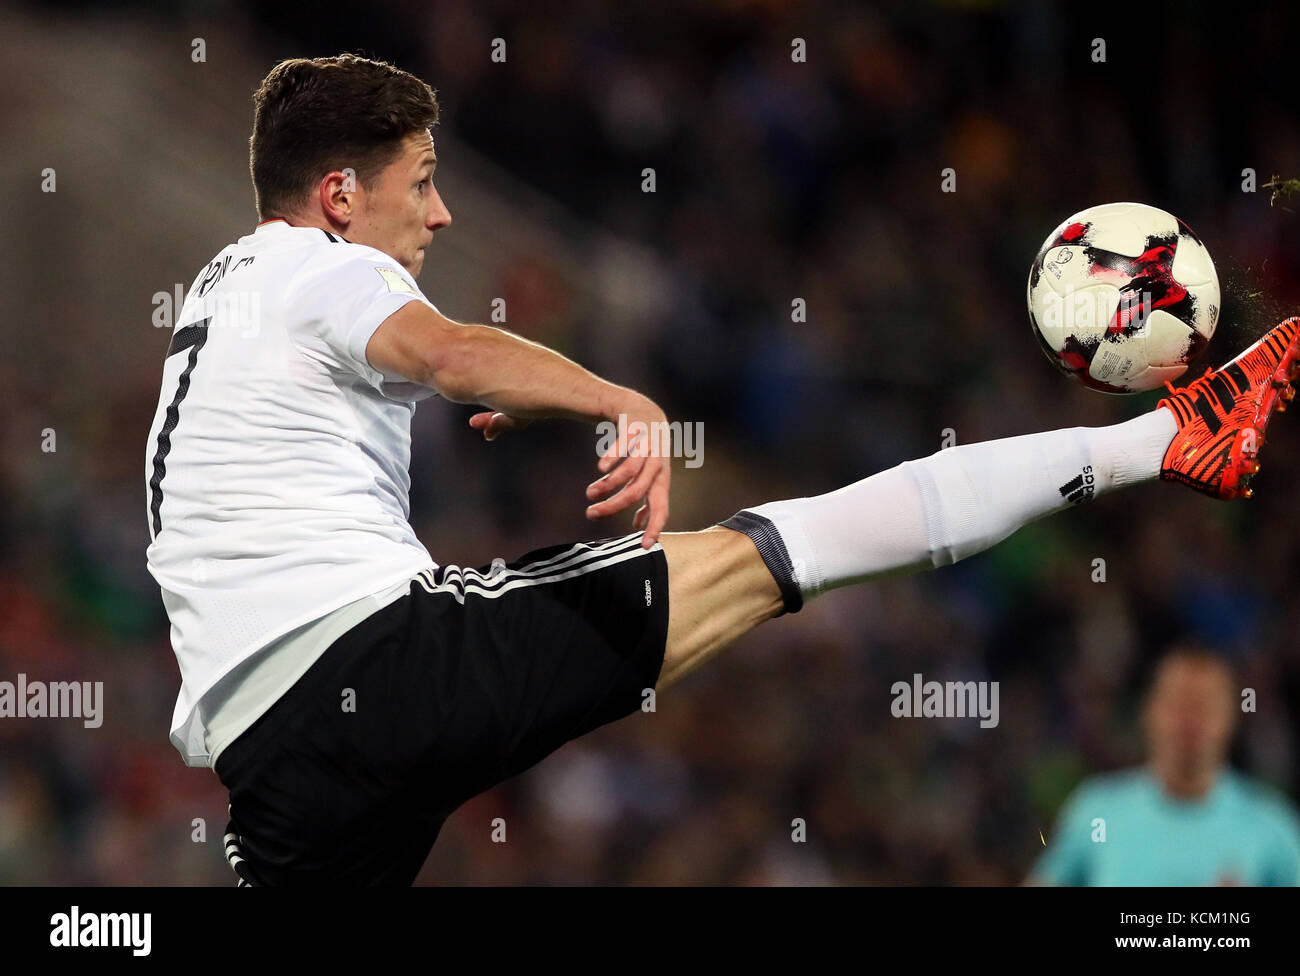 Germany's Julian Draxler during the 2018 FIFA World Cup Qualifying, Group C match at Windsor Park, Belfast. PRESS ASSOCIATION Photo. Picture date: Thursday October 5, 2017. See PA story SOCCER N Ireland. Photo credit should read: Brian Lawless/PA Wire. RESTRICTIONS: Editorial use only, No commercial use without prior permission. Stock Photo